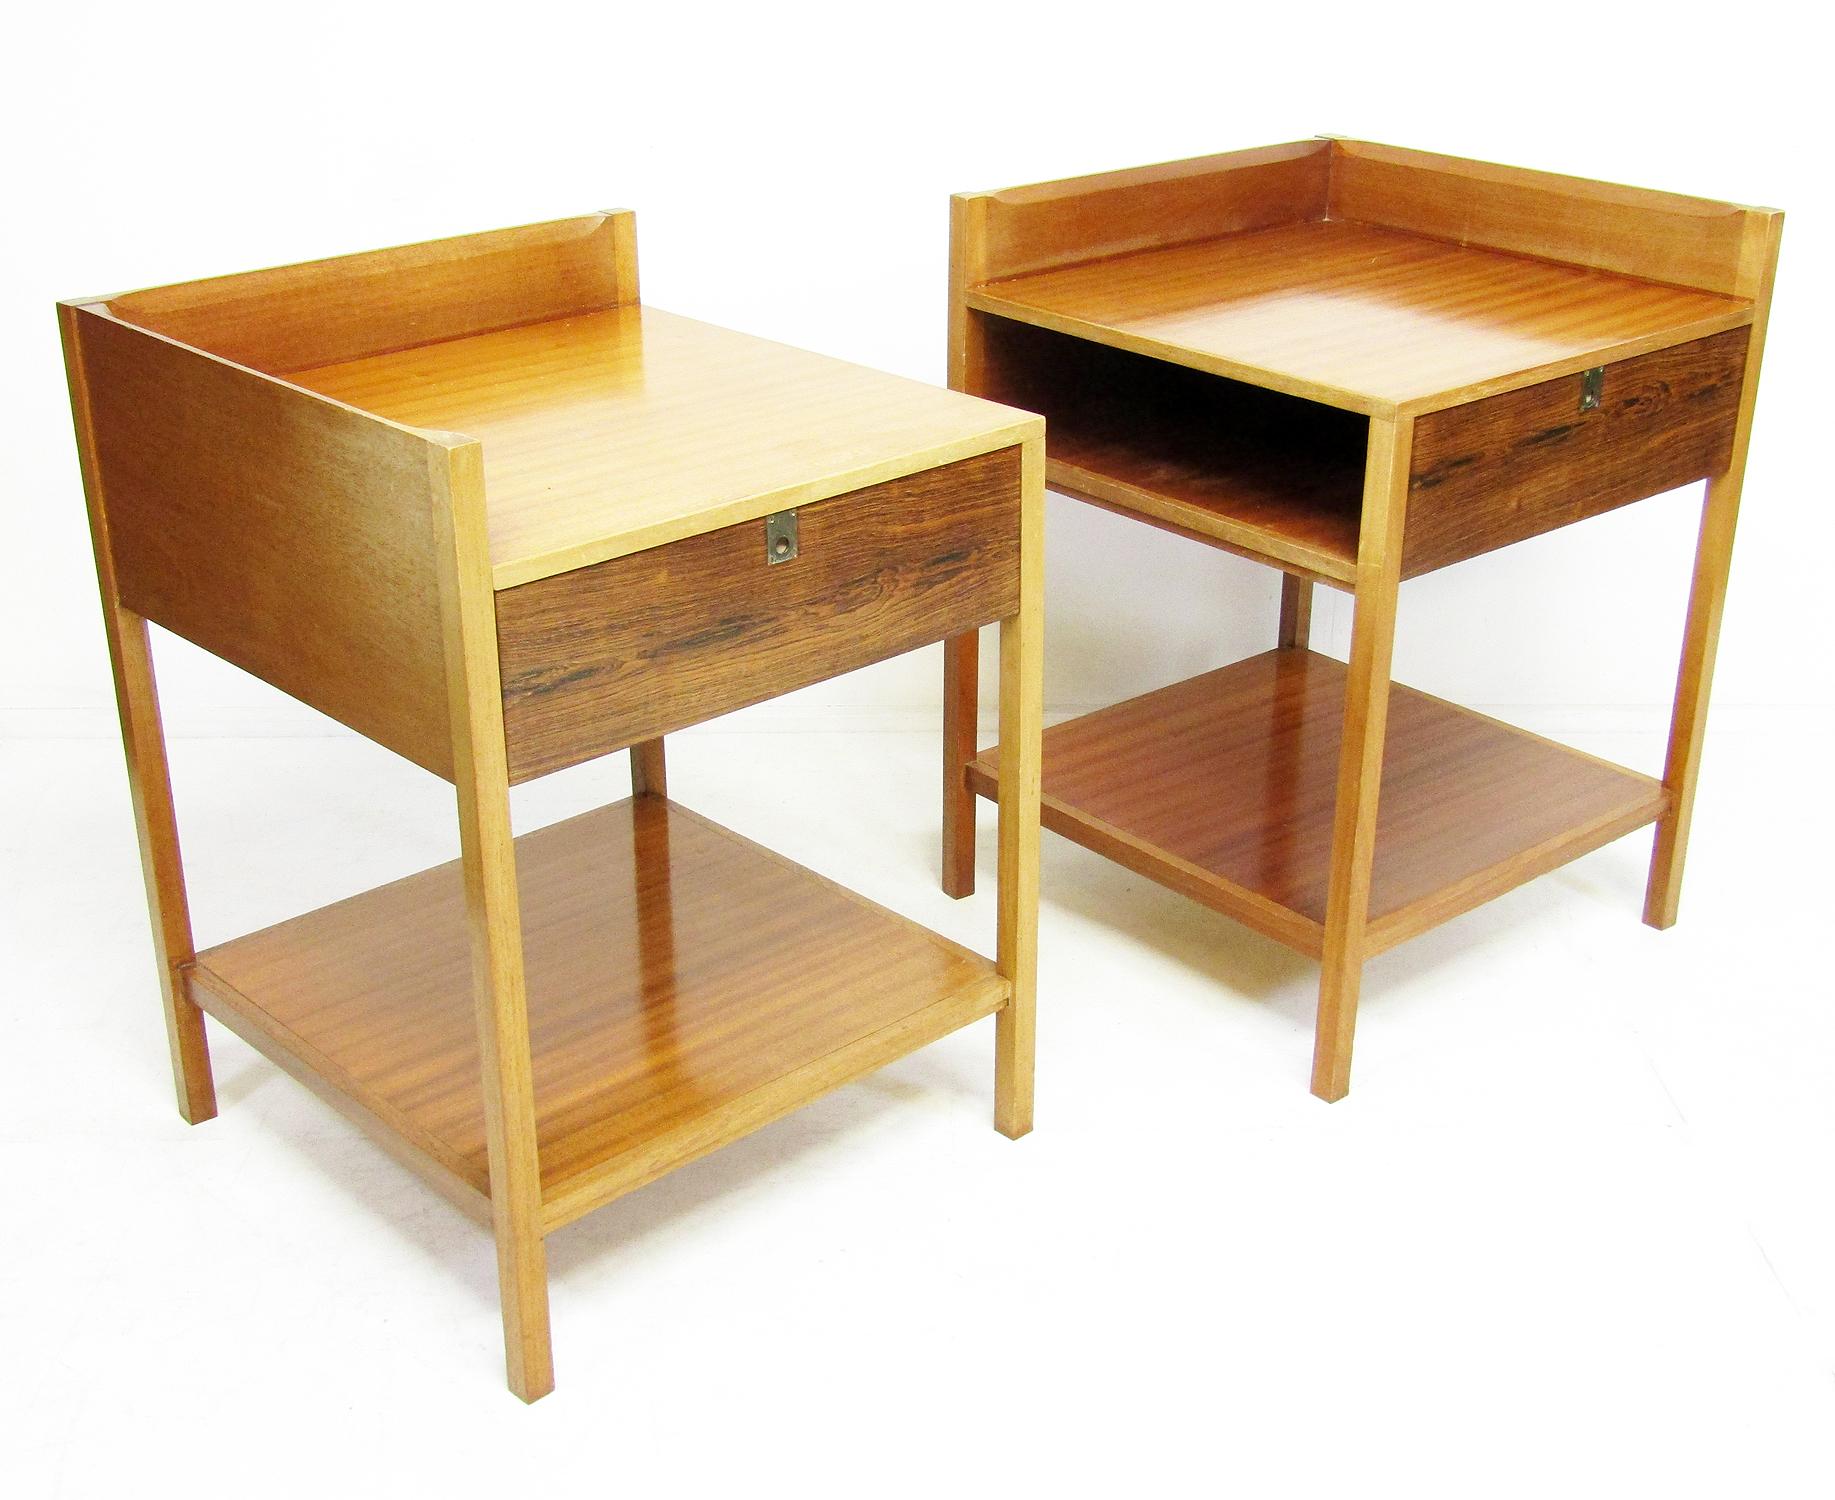 A pair of 1960s bedside or lamp tables in Rio rosewood and mahogany, with brass campaign pulls, probably sold by Heals.

Of generous proportions, the storage sections have flip-down front doors in rosewood, but also allow open bedside